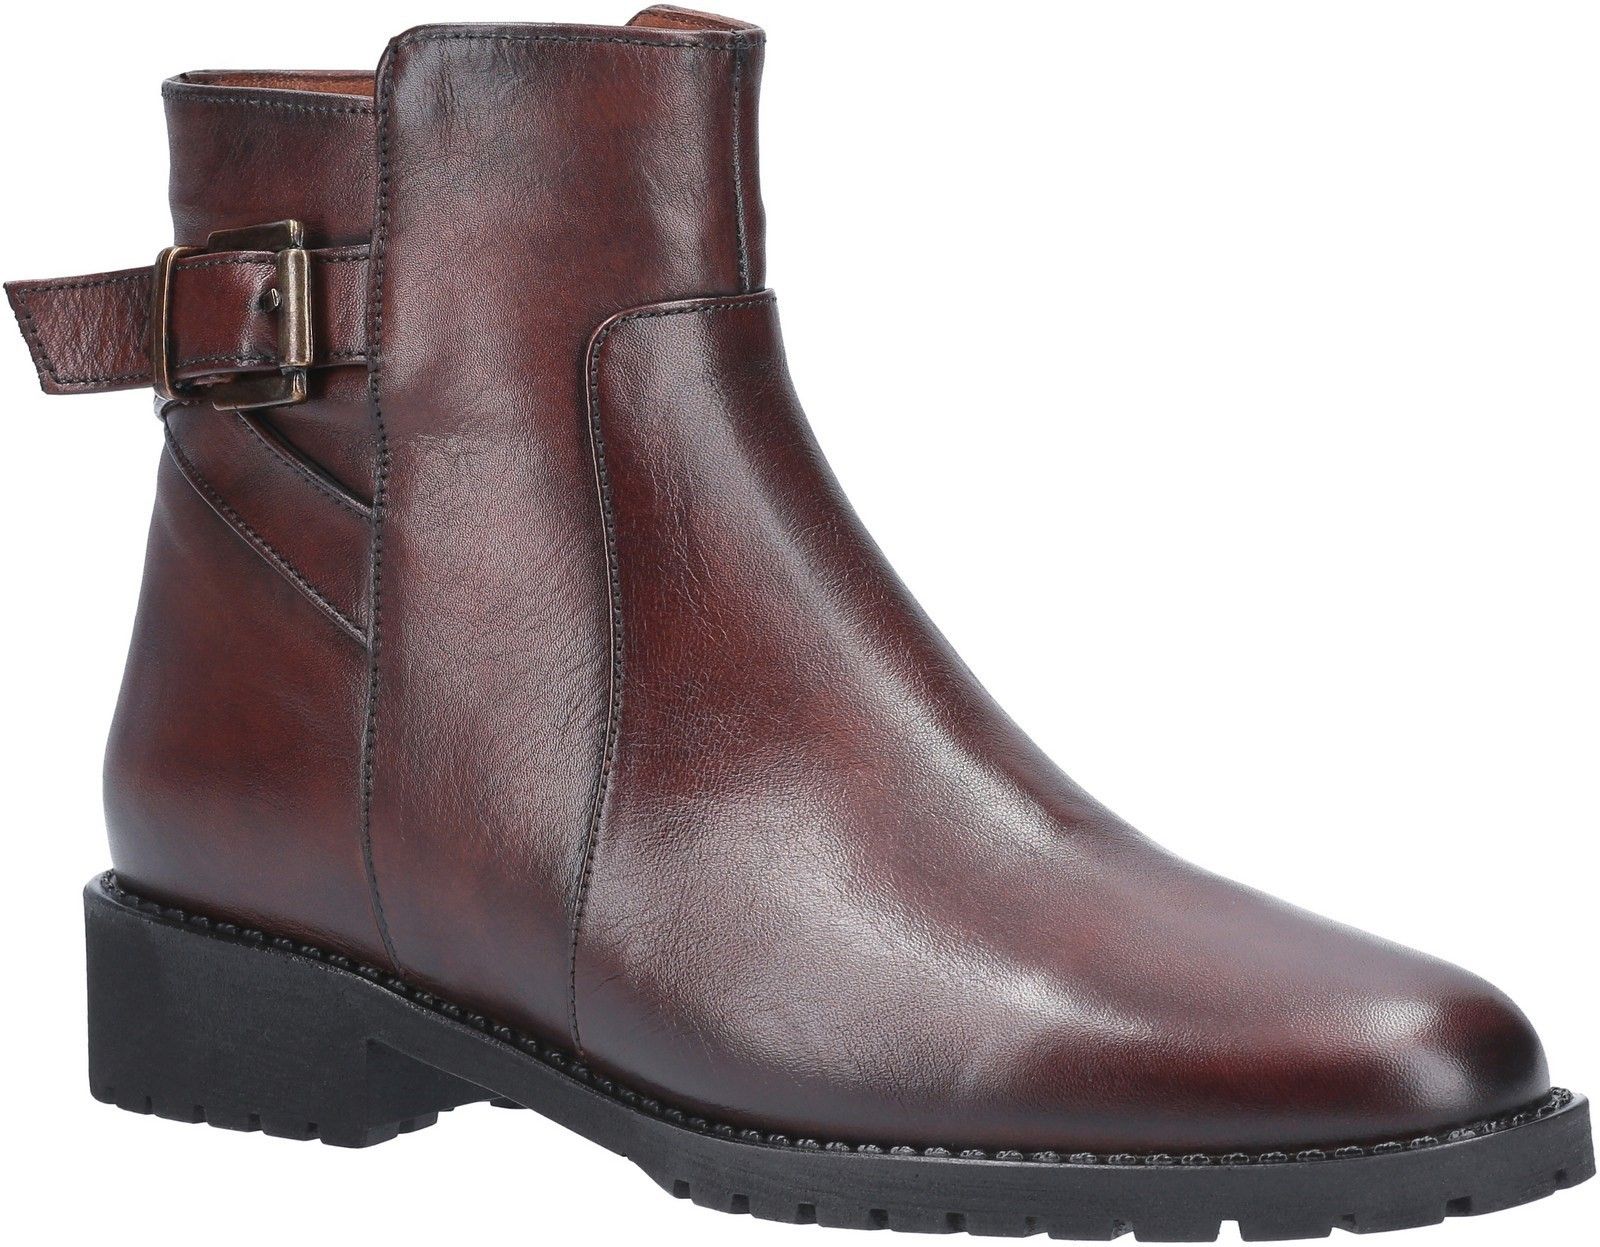 Stand out in style with the Mykonos ankle boot from Riva. This Autumn/Winter essential is crafted from soft leather and will take you from day to night in outstanding comfort. Buckle detailing and side zip for easy on and off with a block heel. Soft Leather. 
Buckle Detailing. 
Side Zip. 
Block Heel.